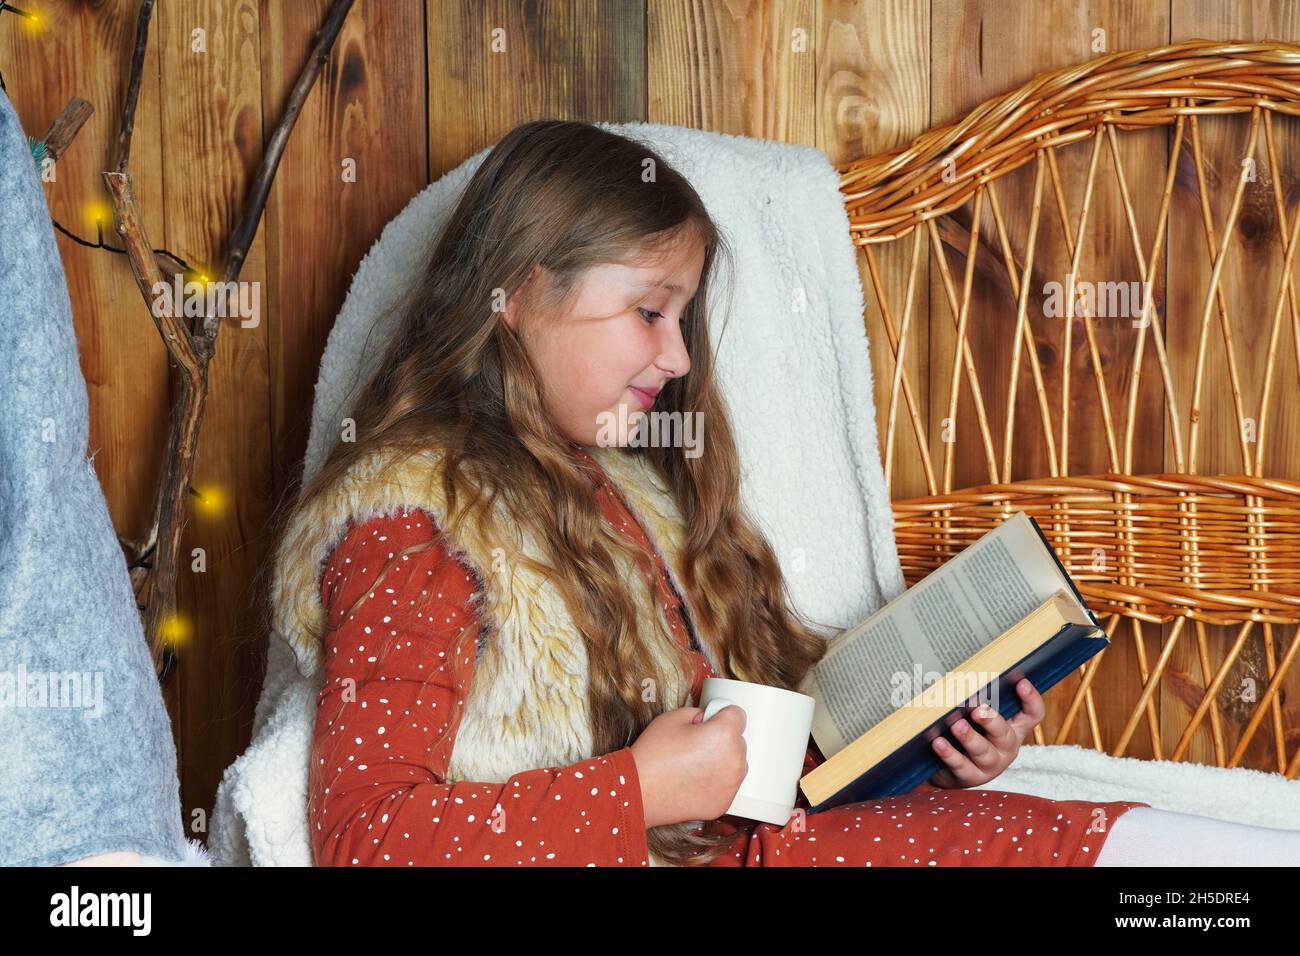 Young smiling long haired girl lying on a wicker couch, reading a book, holding a mug of hot drink near the decorated Christmas tree. Girl at Xmas. Stock Photo